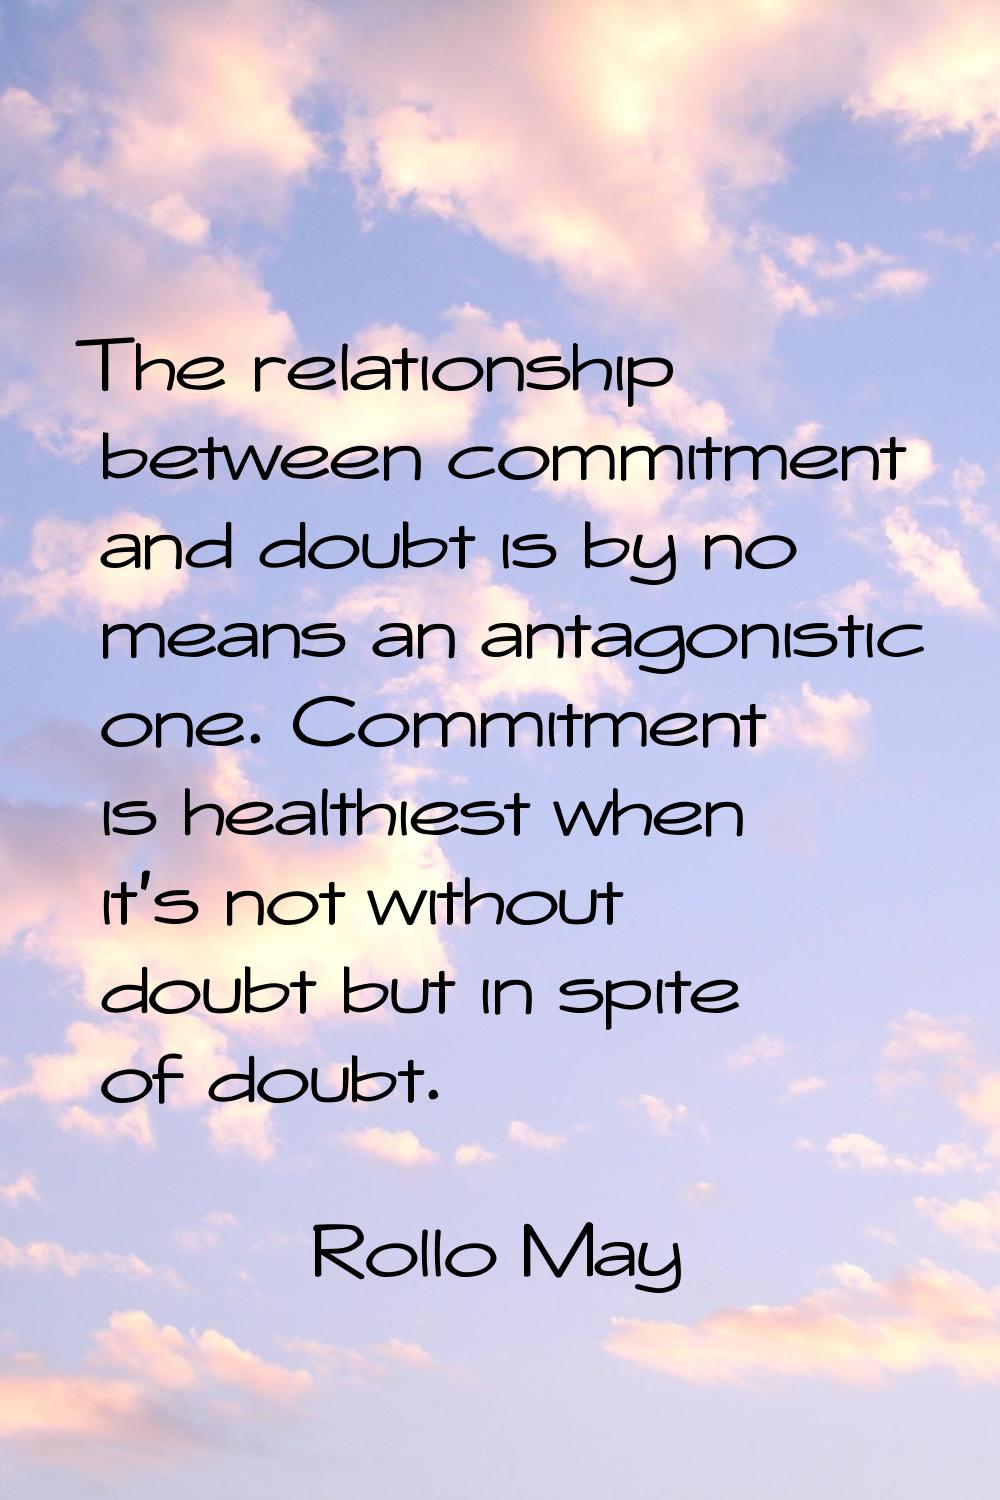 The relationship between commitment and doubt is by no means an antagonistic one. Commitment is hea